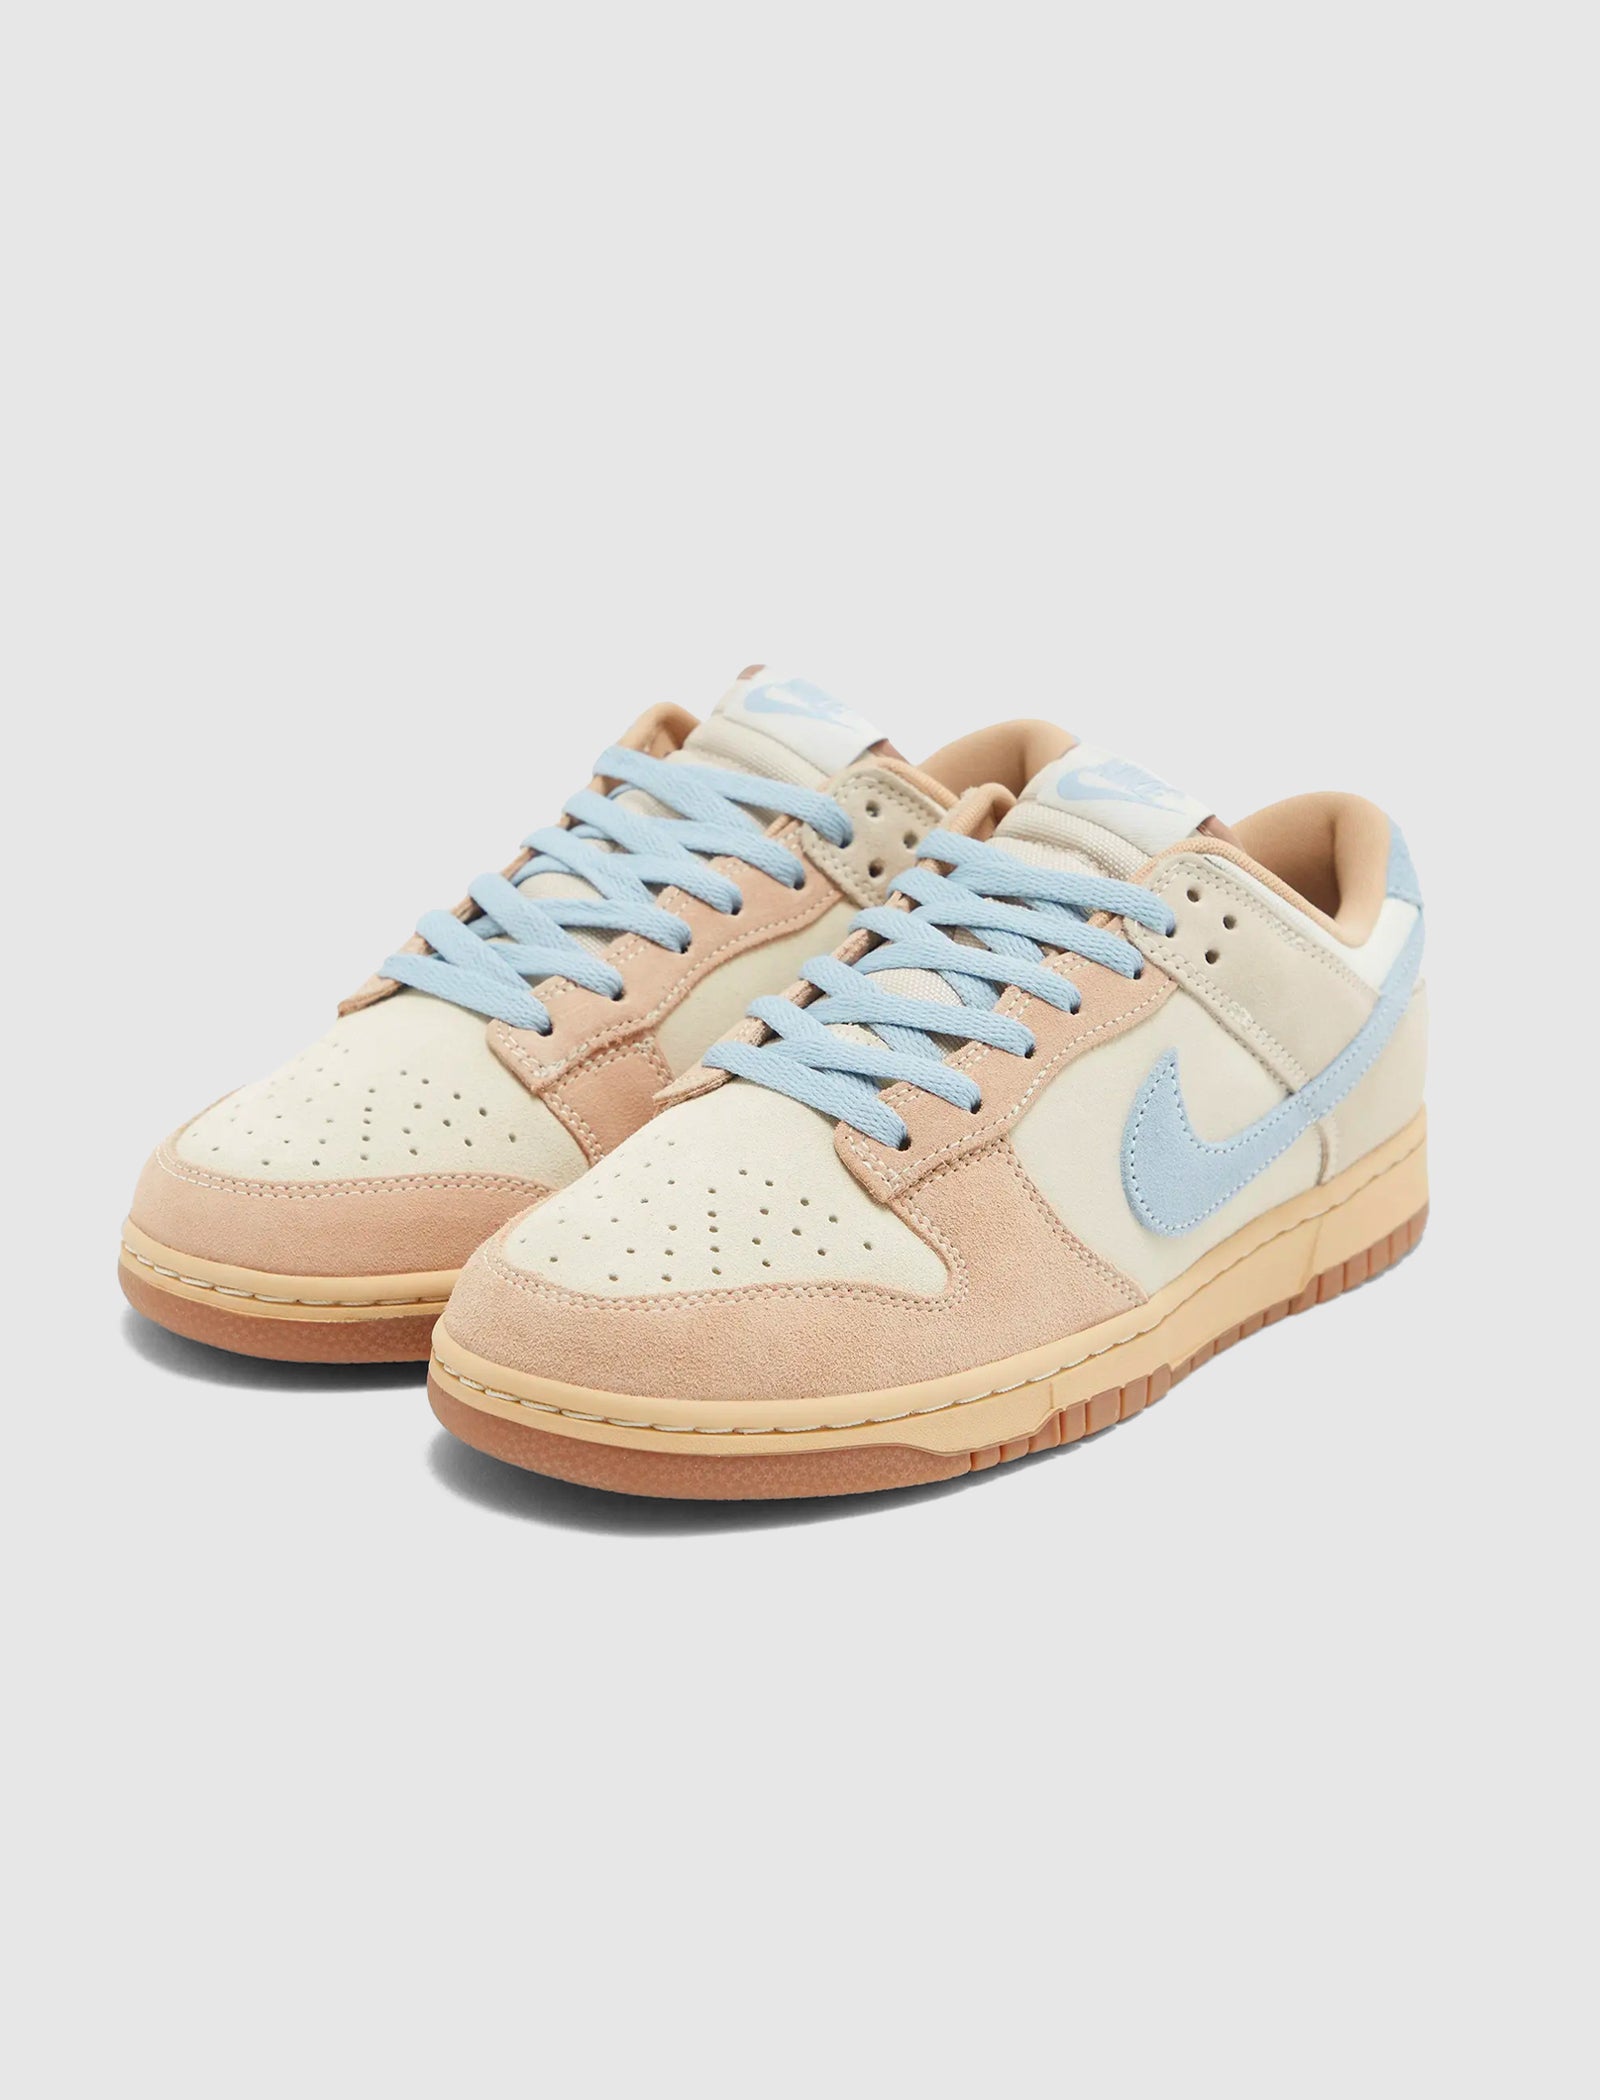 DUNK LOW "LIGHT ARMORY BLUE"